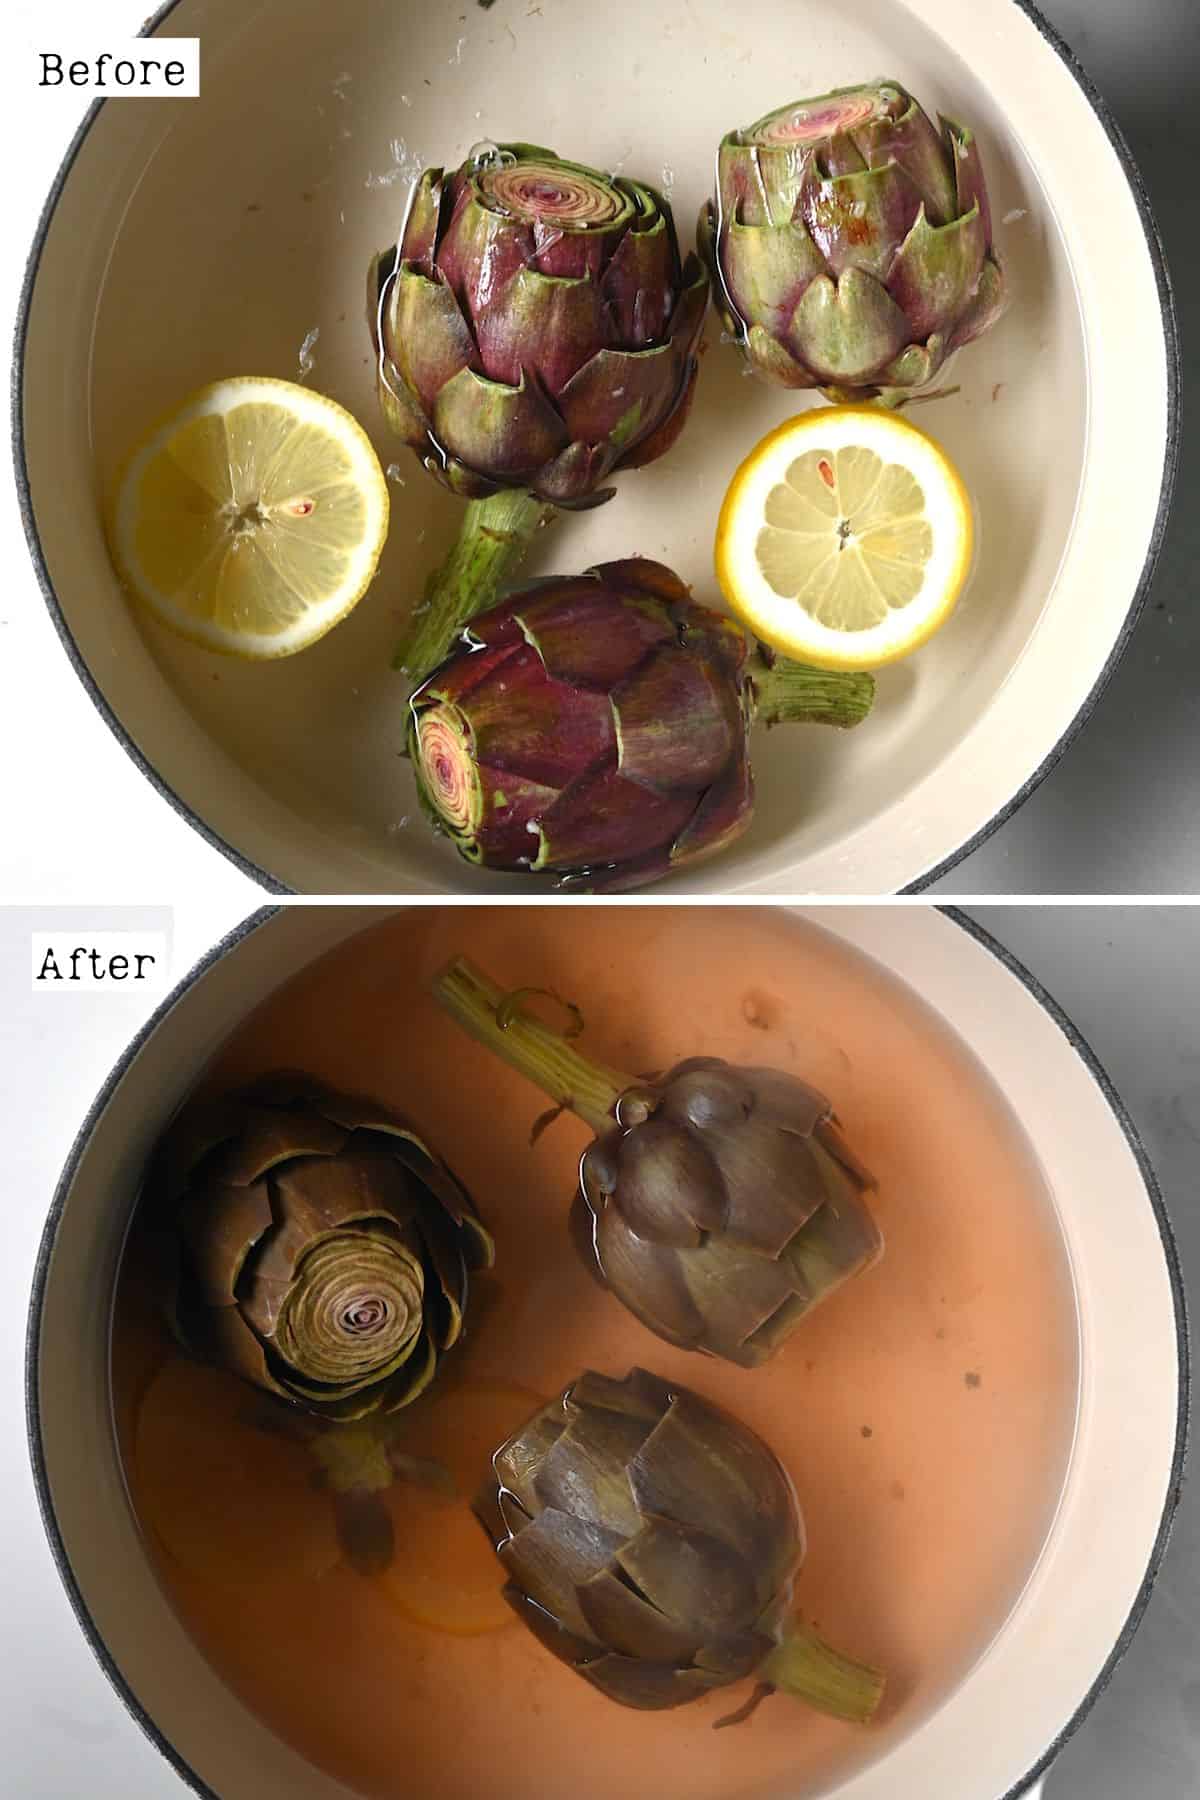 Before and after boiling artichokes